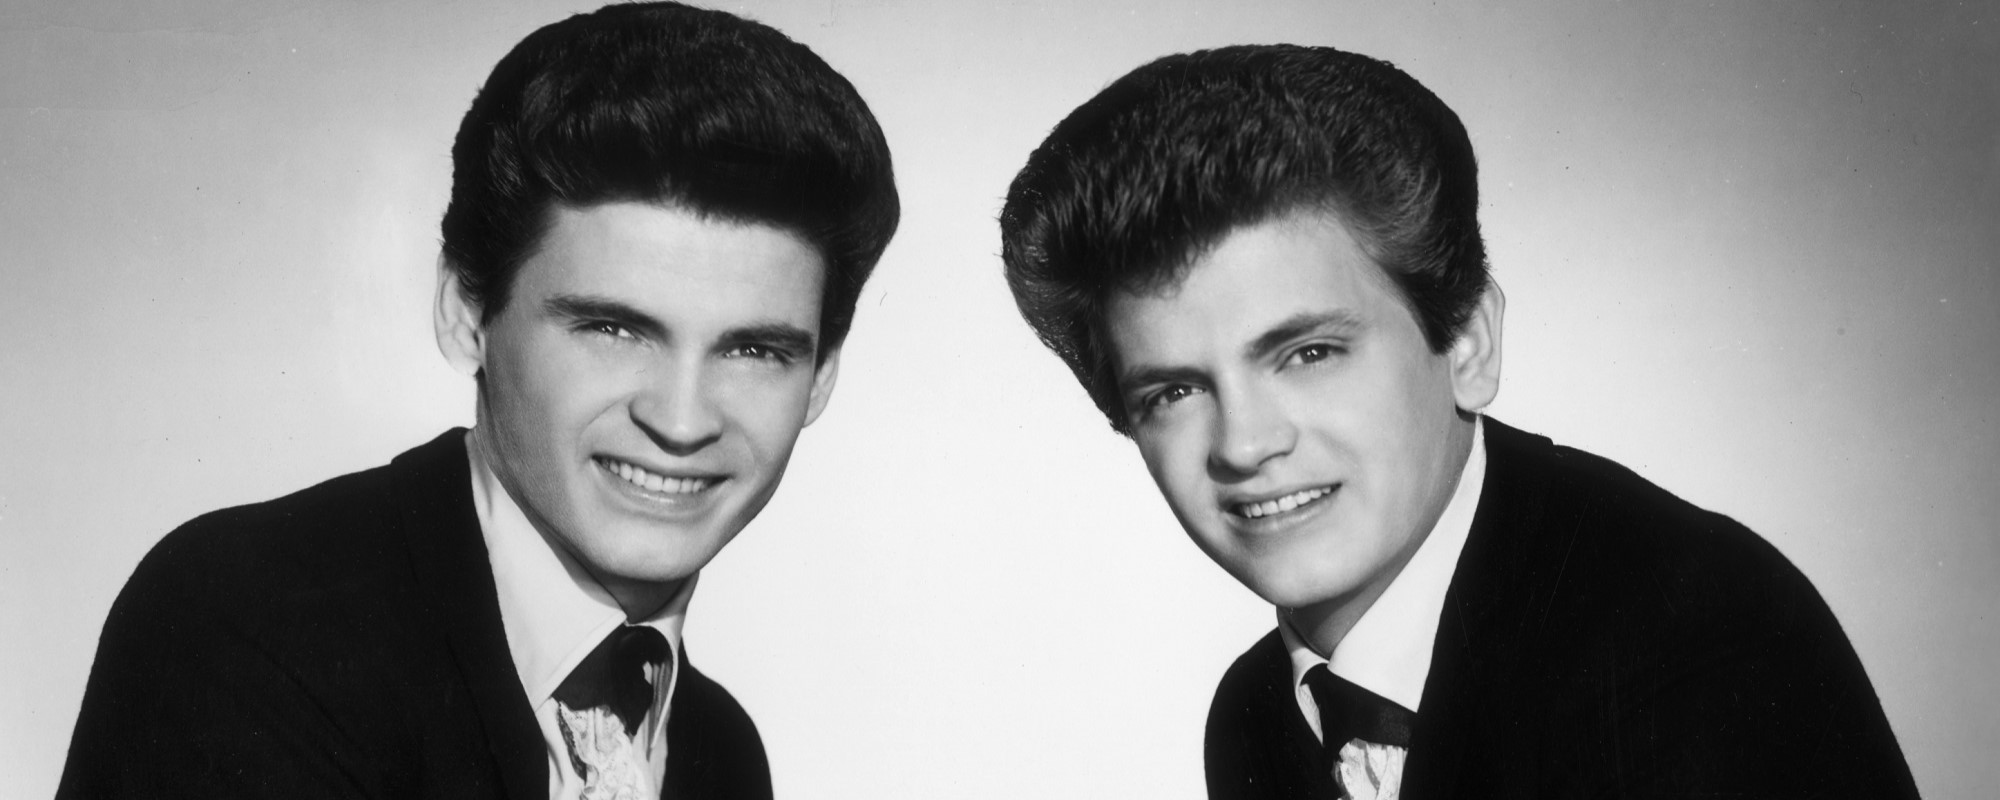 On This Day in 1960: The Everly Brothers’ Harmonious Career Highlight “Cathy’s Clown” Became a No. 1 Hit